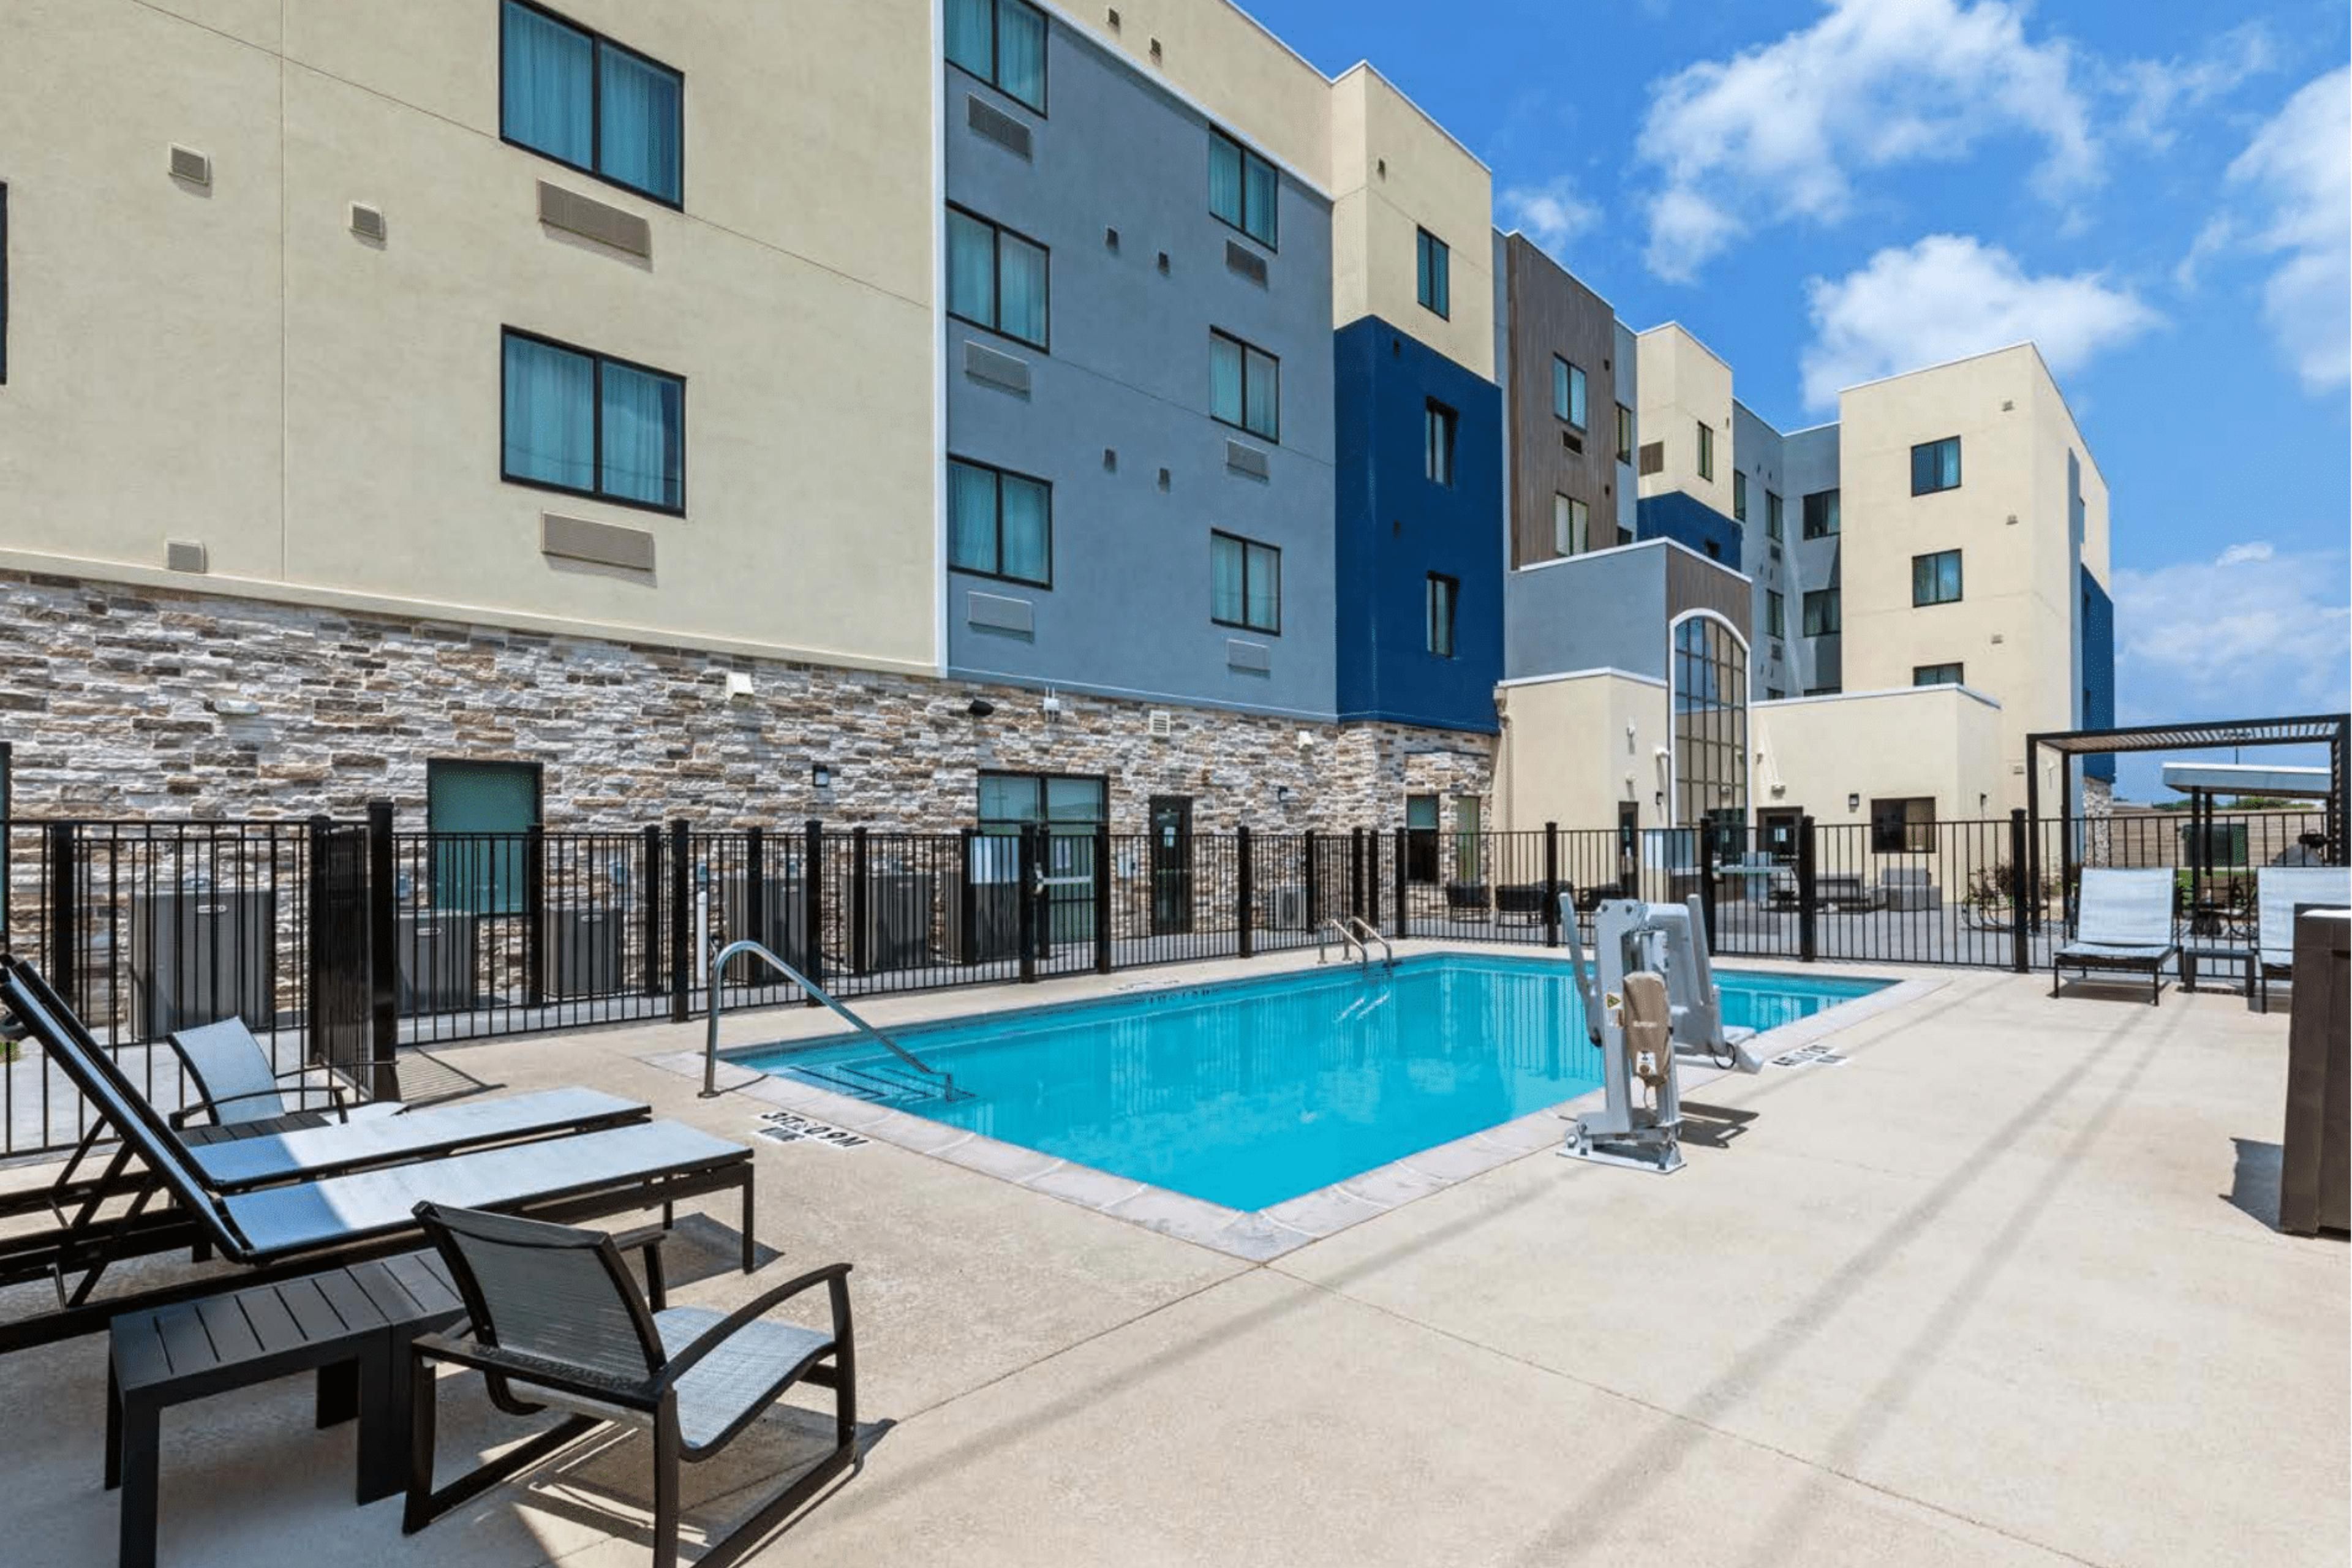 The New Staybridge Suites Waco South Woodway is the perfect stop for families. Our guests love our outdoor amenities like our pool, guest patio, and sports court. Whether you are staying with us for a short stay, or taking advantage of our amazing long term and extended stay amenities, the pool will be perfect for you and your family. 